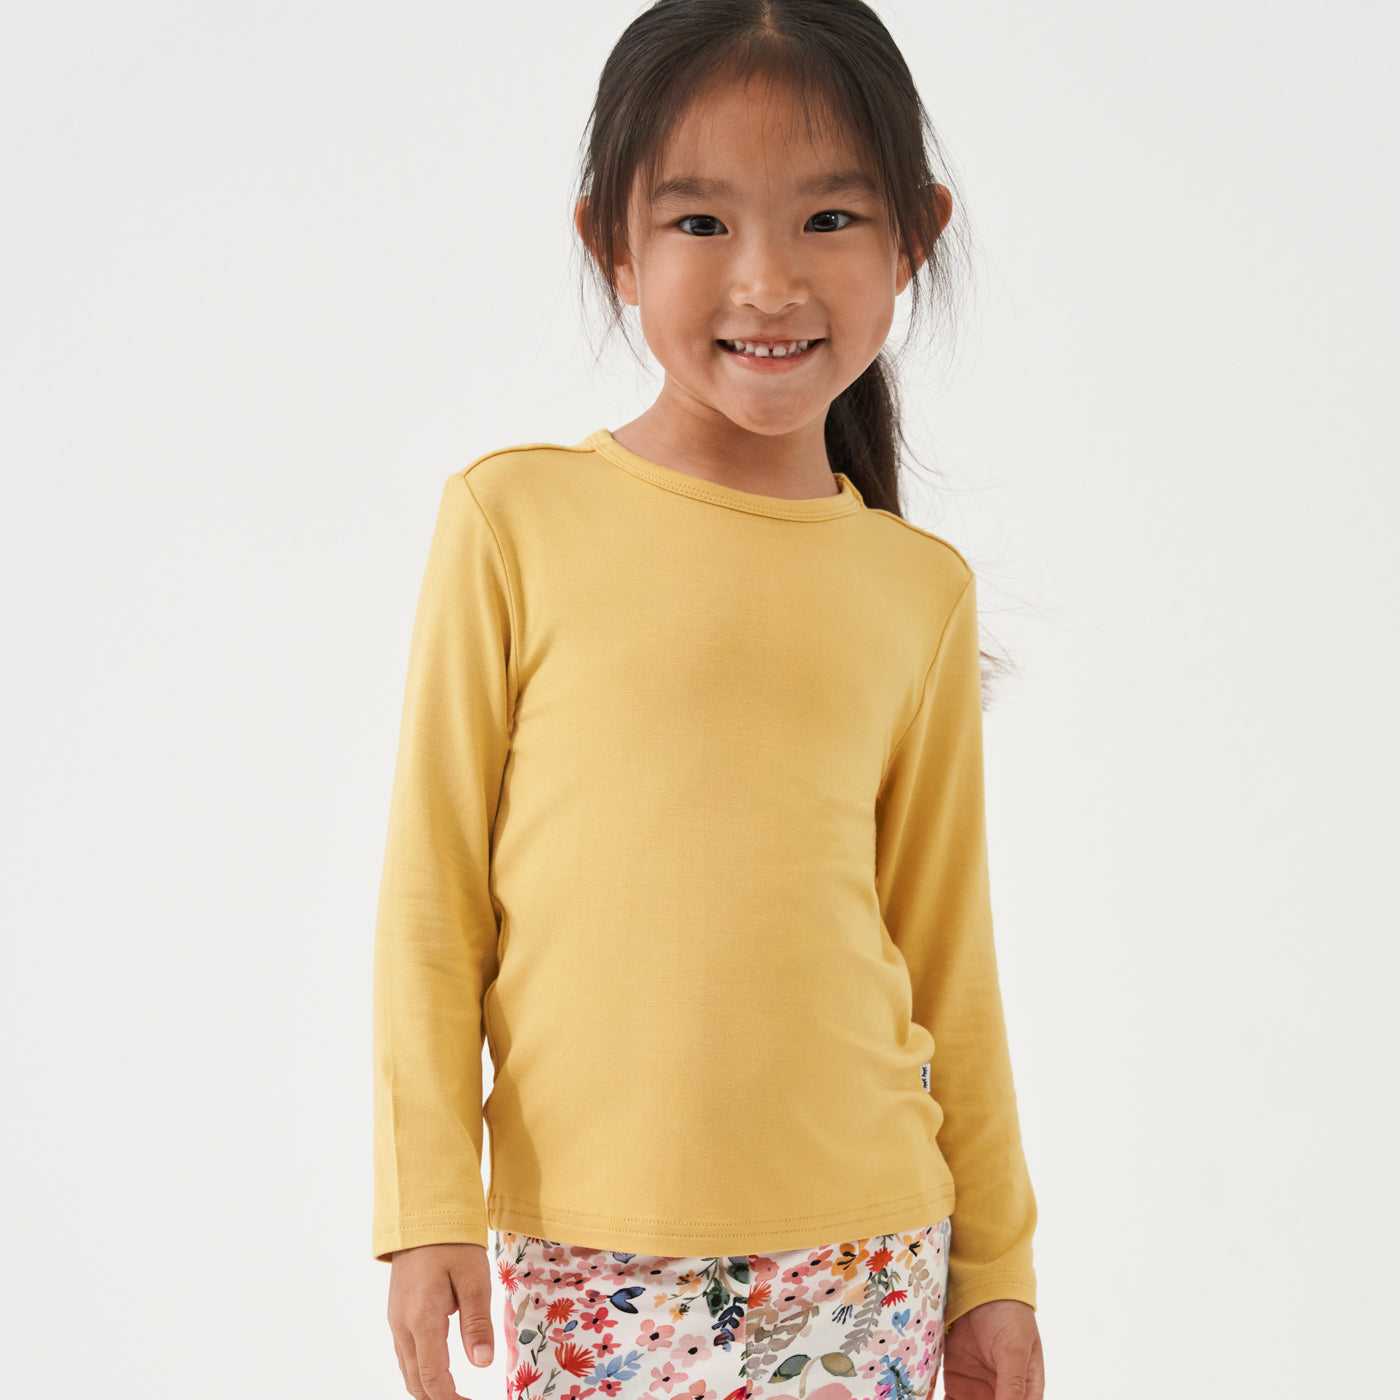 Child wearing a Honey classic tee